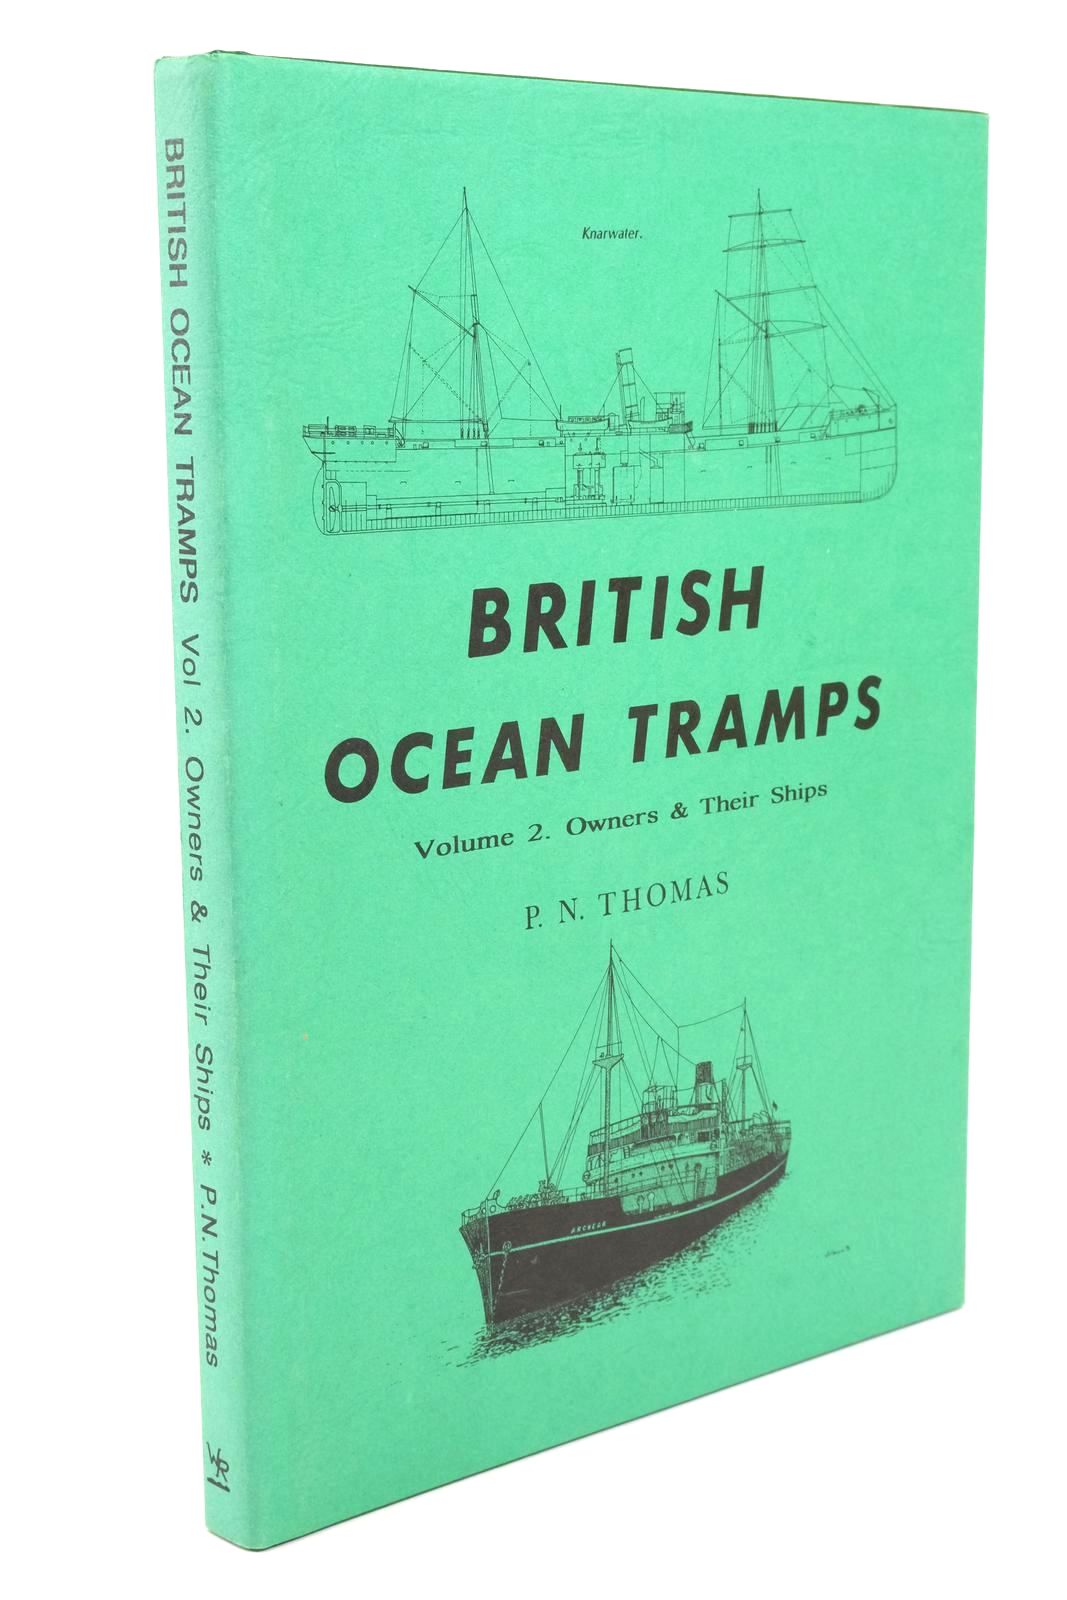 Photo of BRITISH OCEAN TRAMPS VOLUME 2. OWNERS & THEIR SHIPS written by Thomas, P.N. illustrated by Waine, C.V. published by Waine Research Publications (STOCK CODE: 1322798)  for sale by Stella & Rose's Books